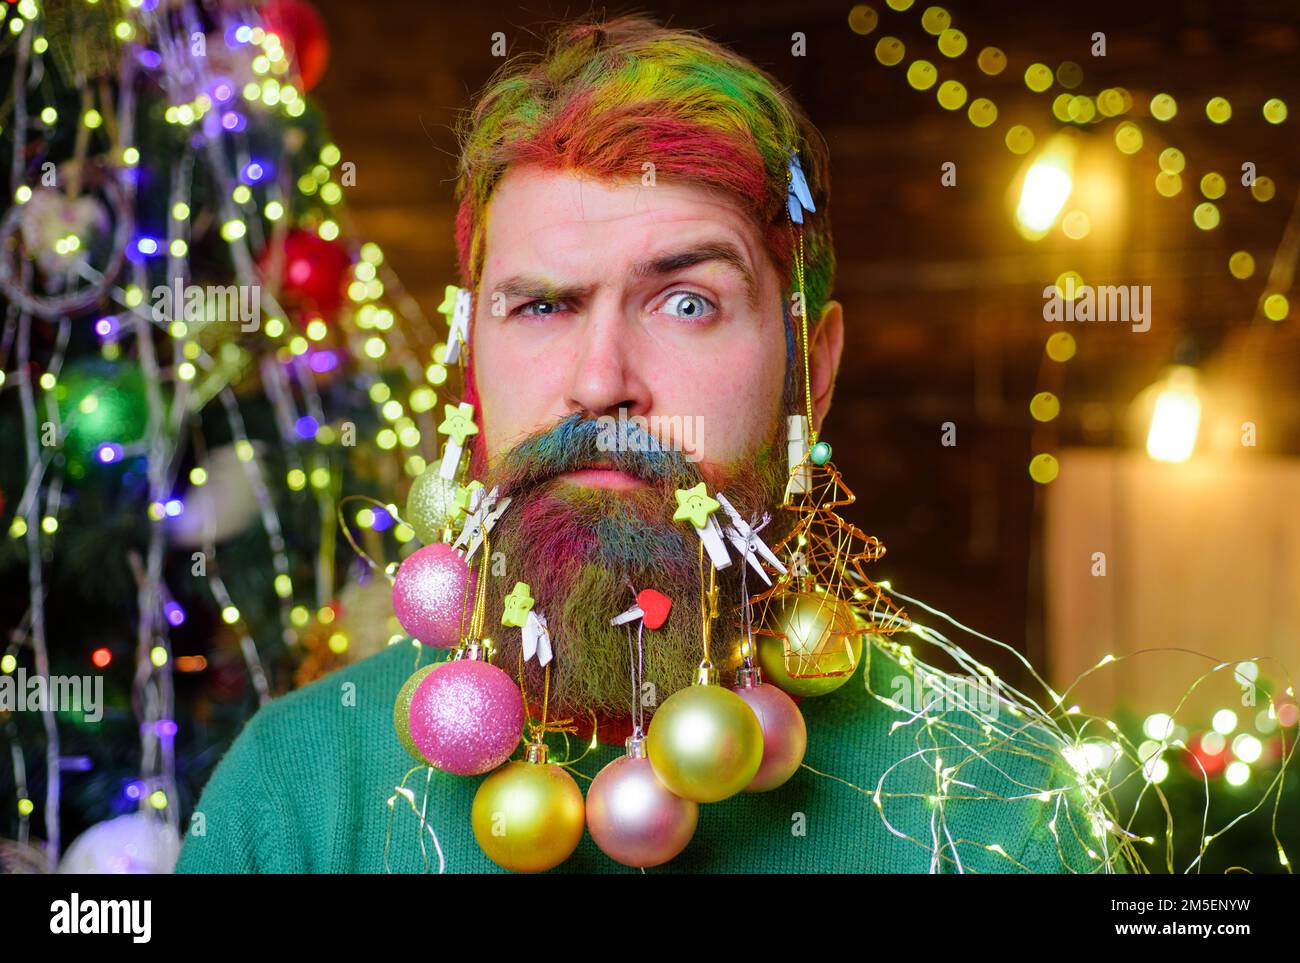 Serious bearded man with decorated beard. Christmas decoration. New year party. Holiday celebration. Stock Photo